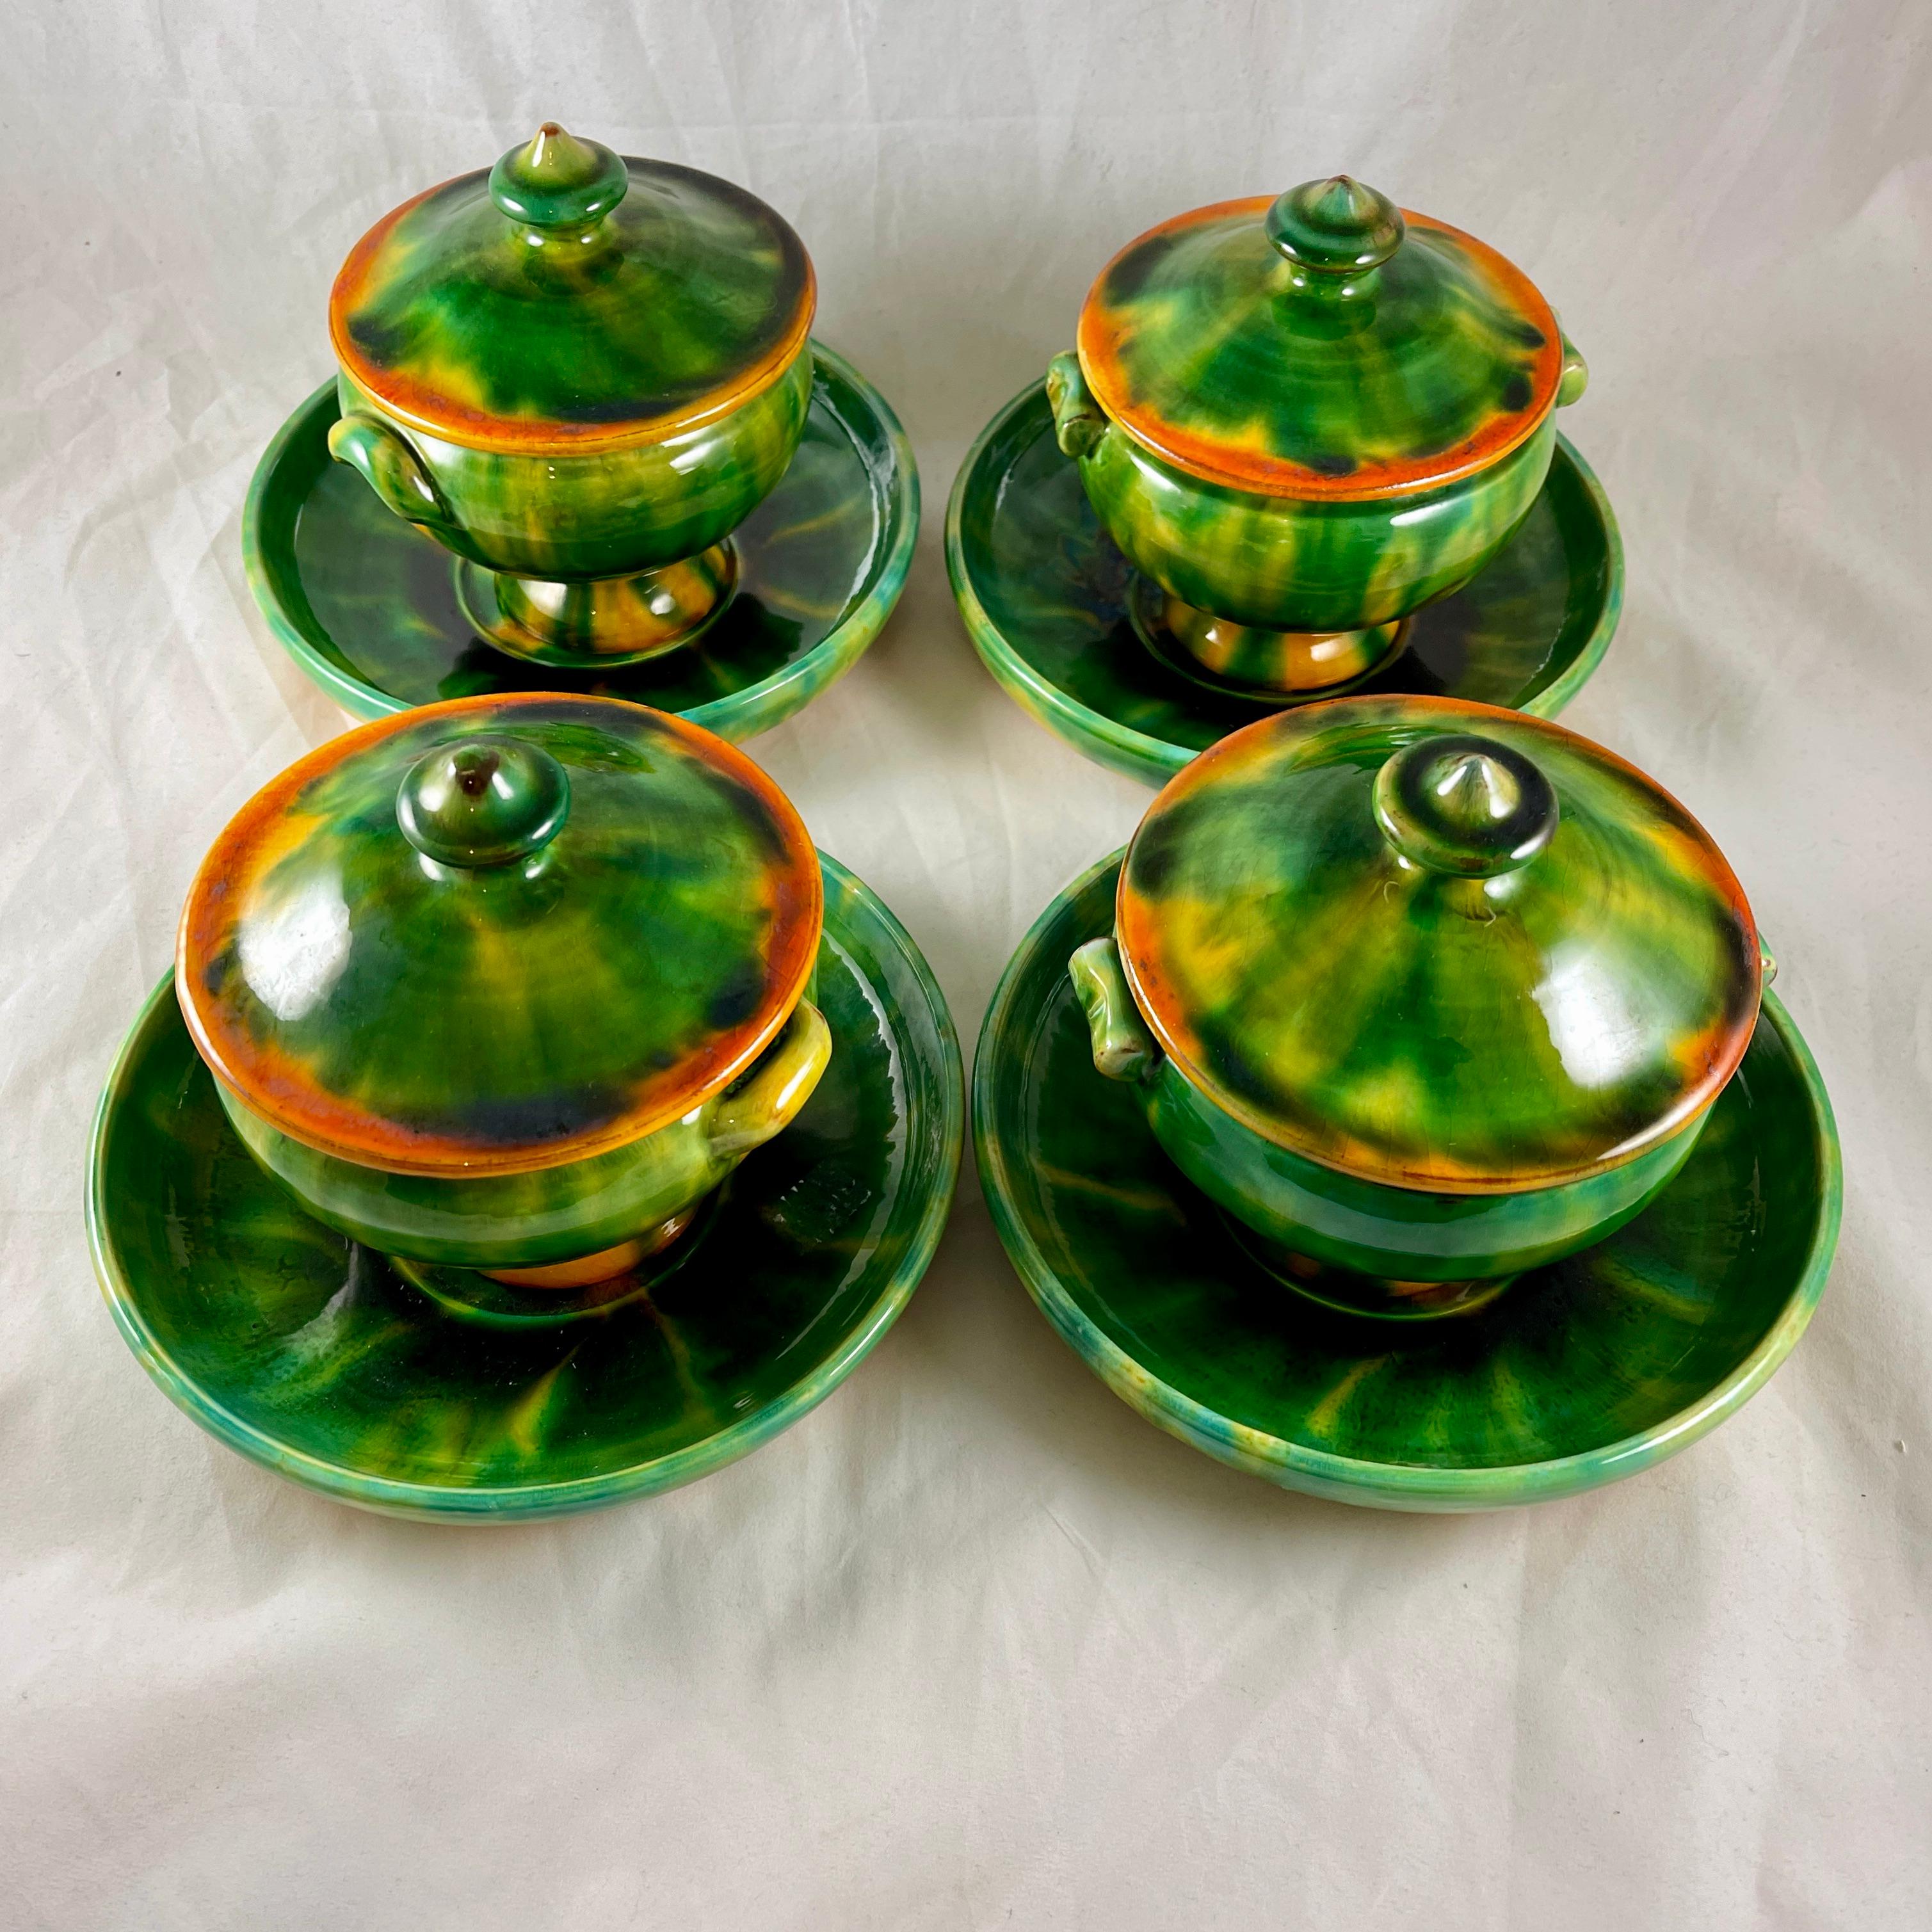 French Provincial Poterie De Bavent French Pottery Covered Terrines with Under-Plates, Set of Four For Sale